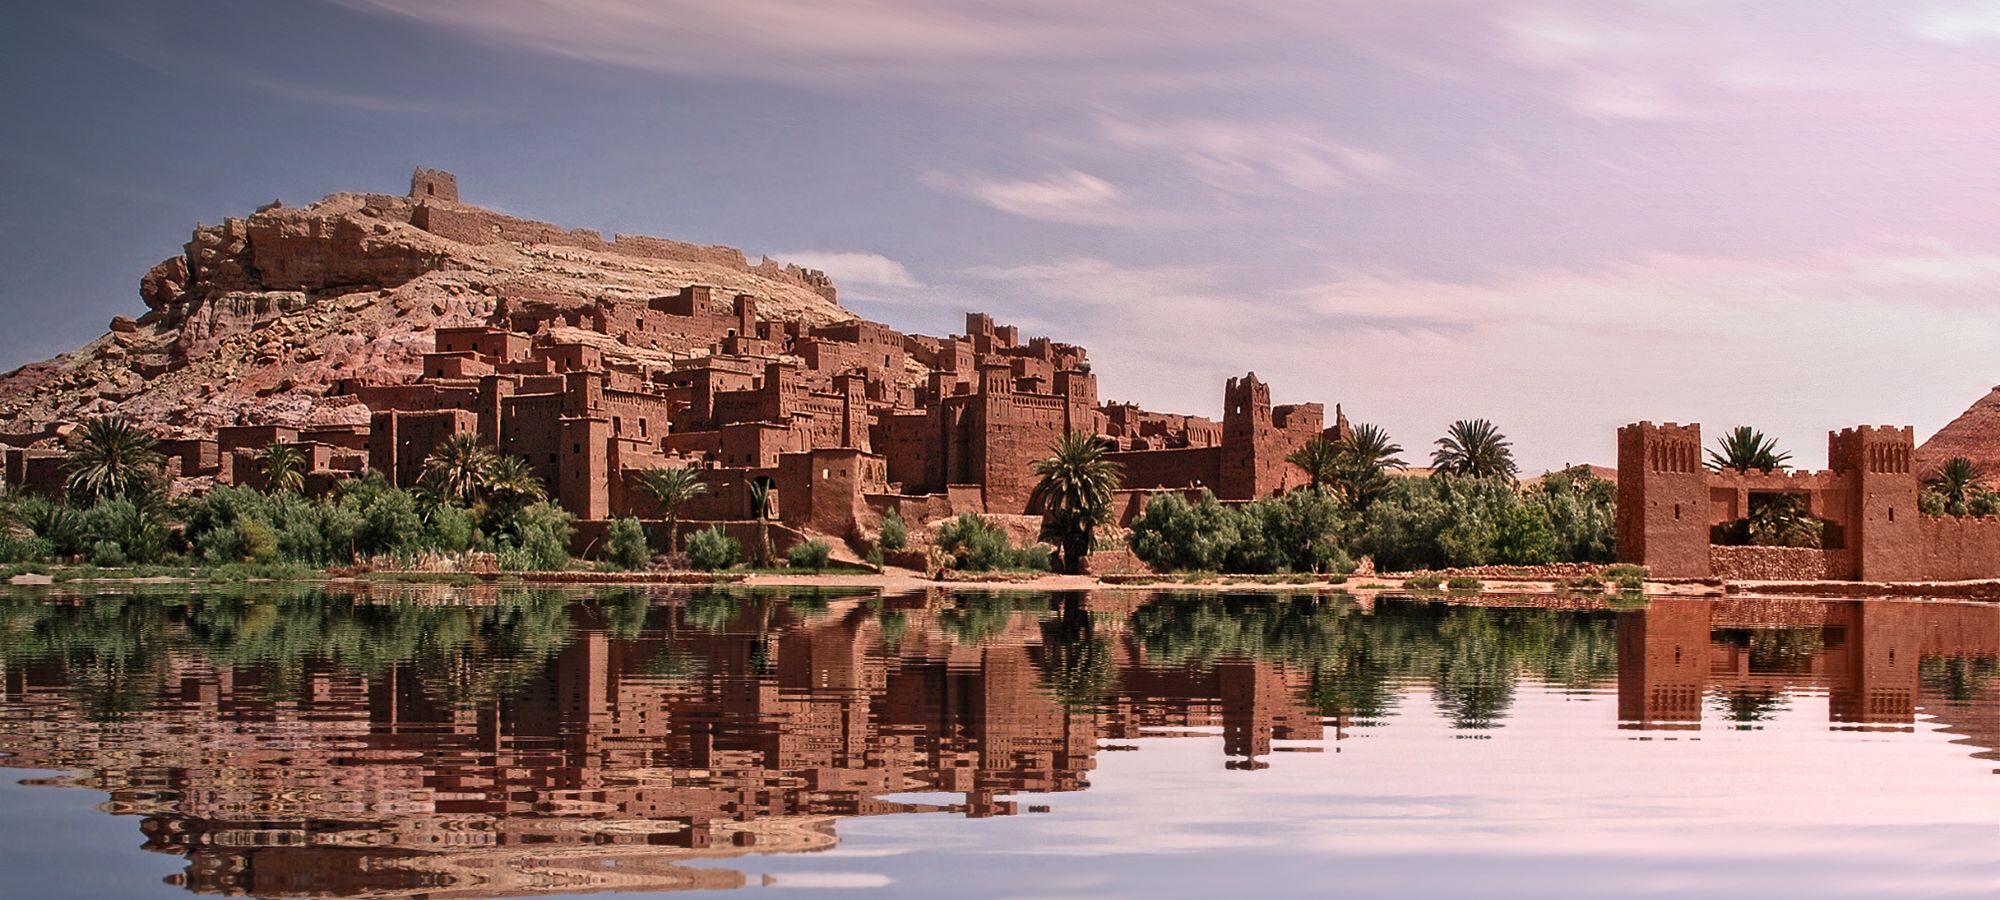 One day trip to Ait ben haddou form Marrakech